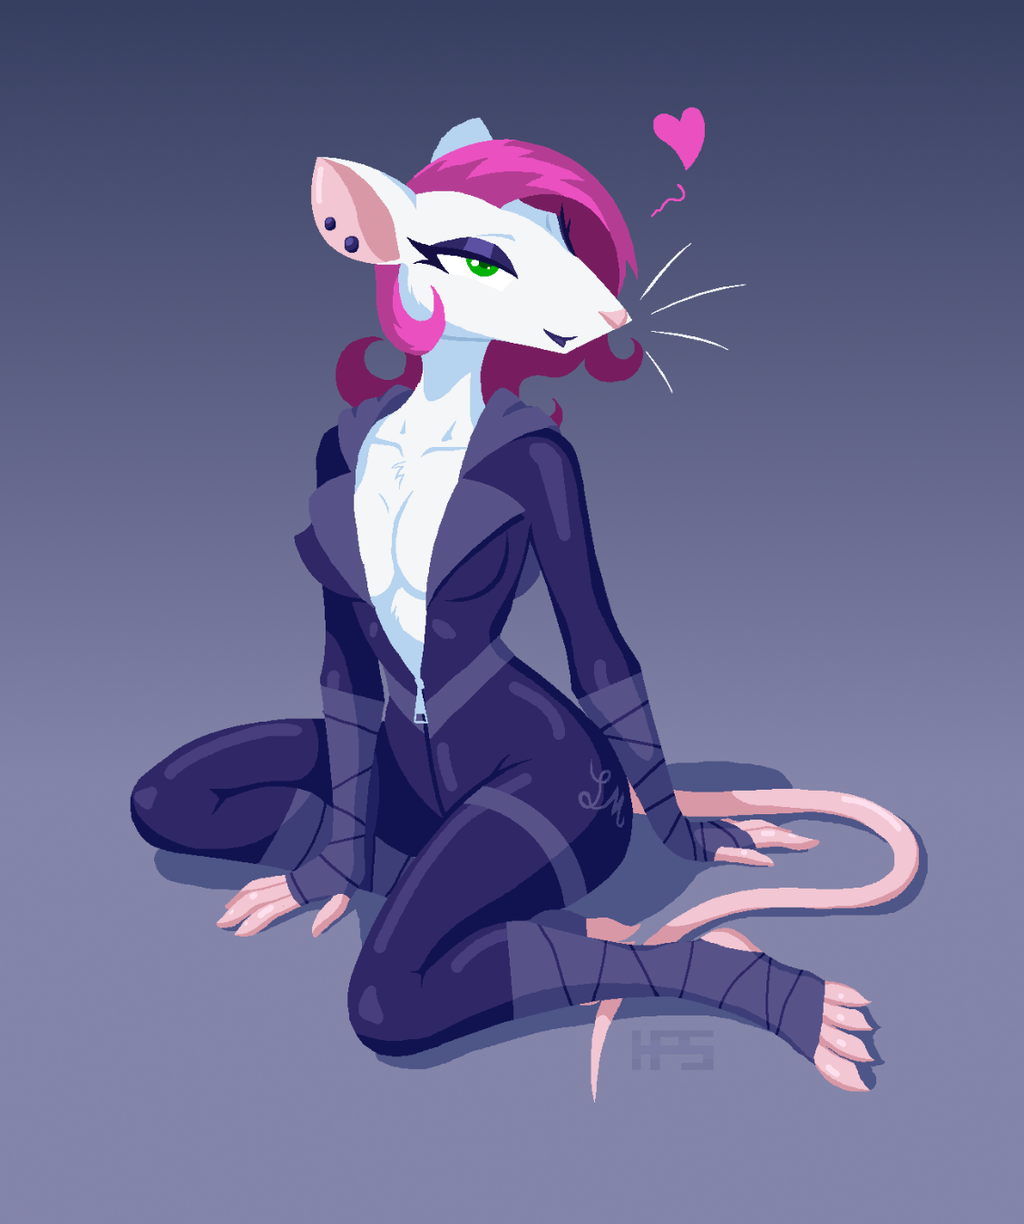 I wanted a rat character, so I made one! 